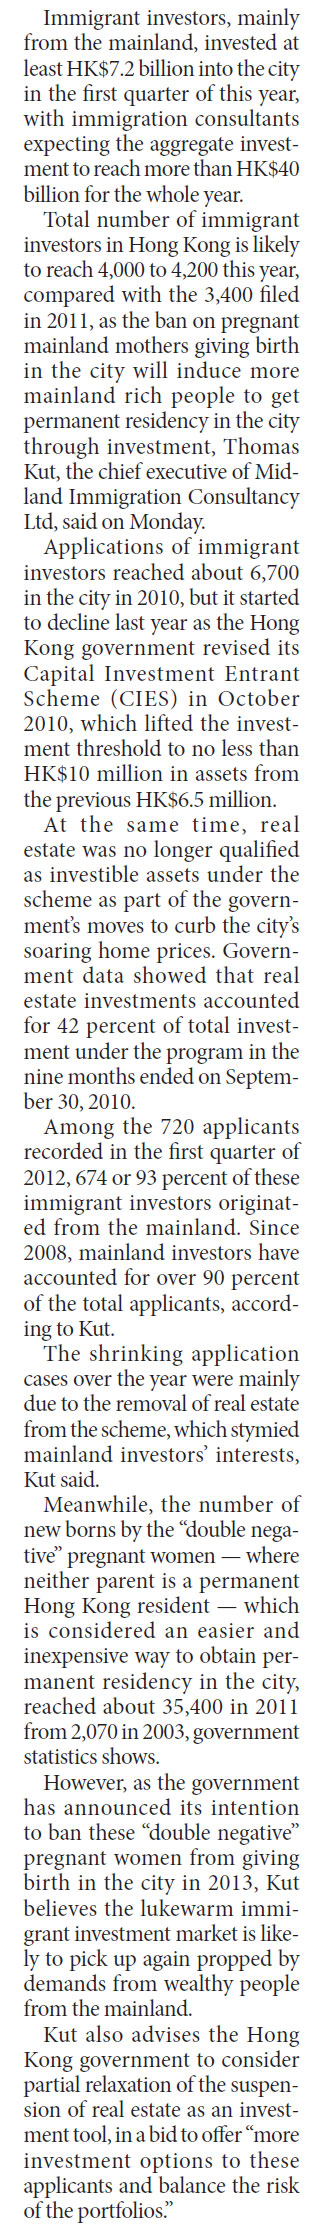 Immigrant investment to reach HK$40b